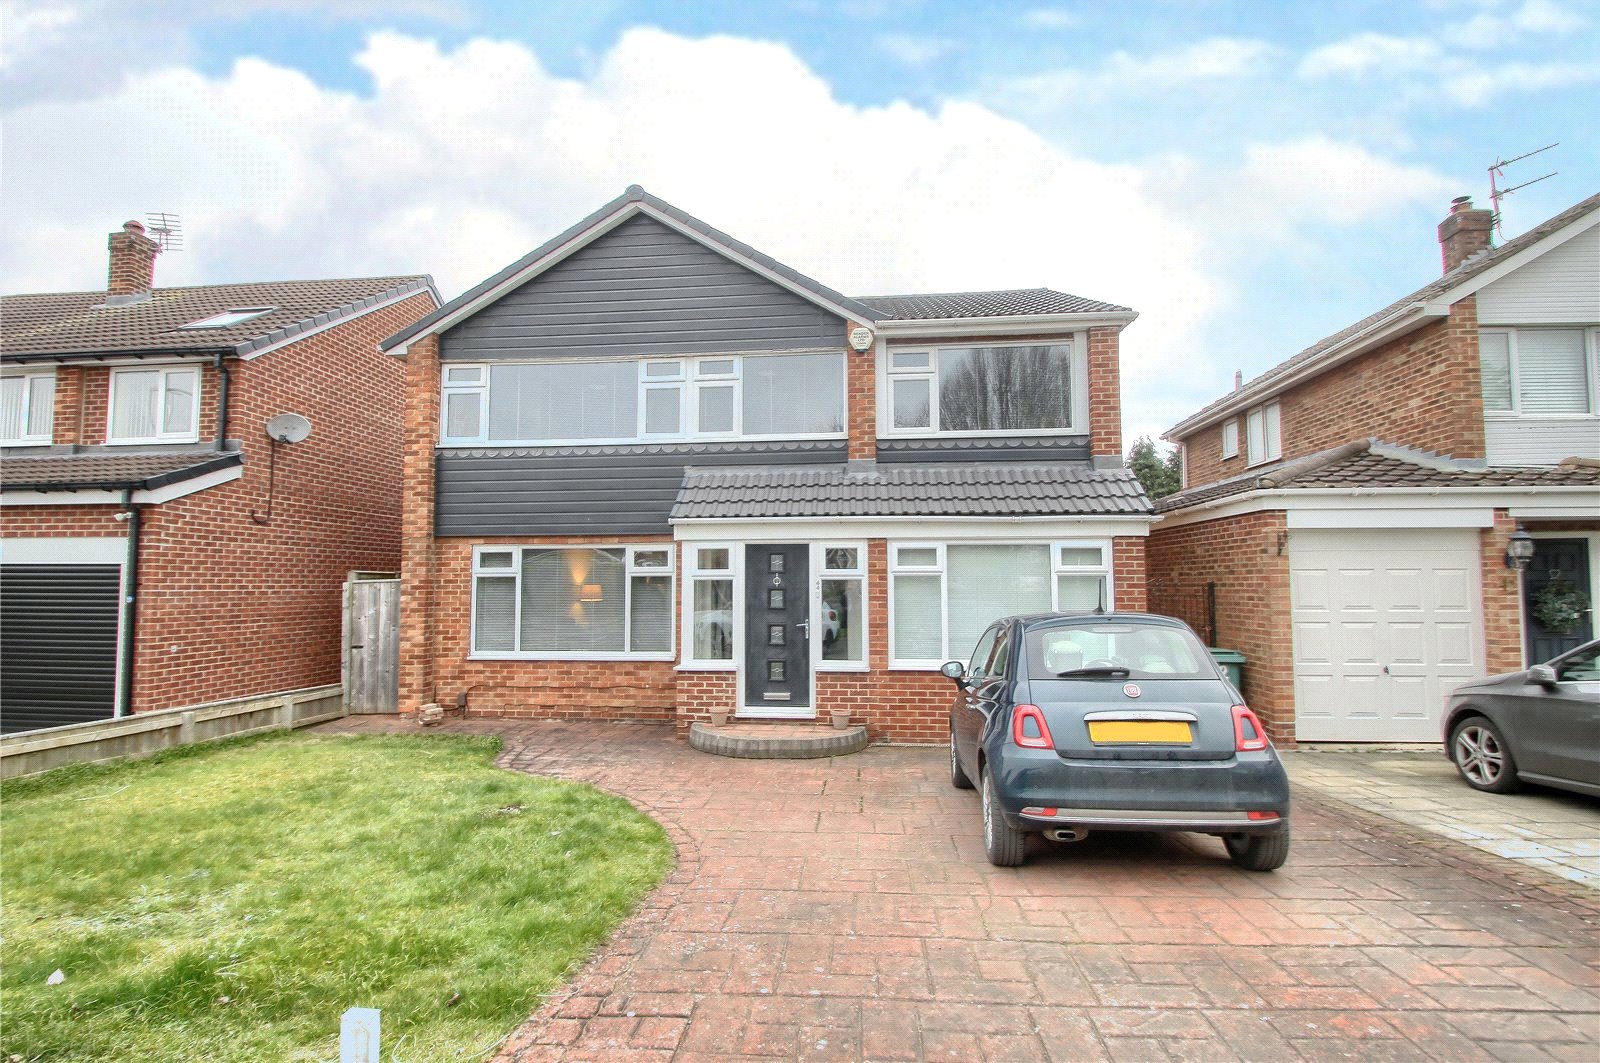 5 bed house for sale in Meadowfield Drive, Eaglescliffe  - Property Image 1